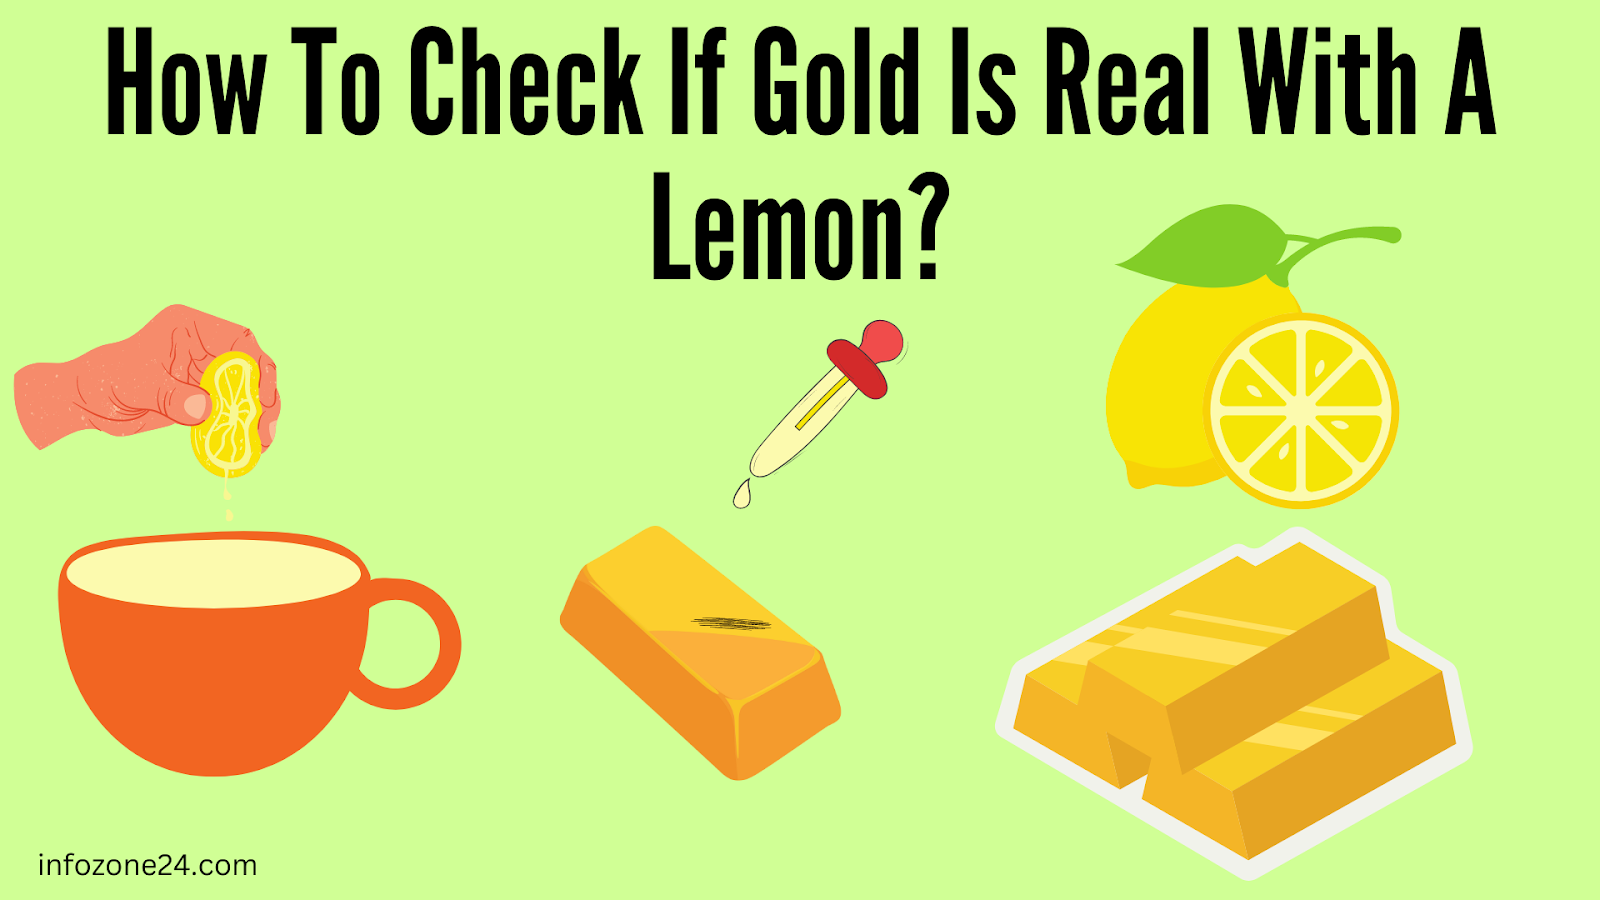 Check If Gold Is Real With A Lemon